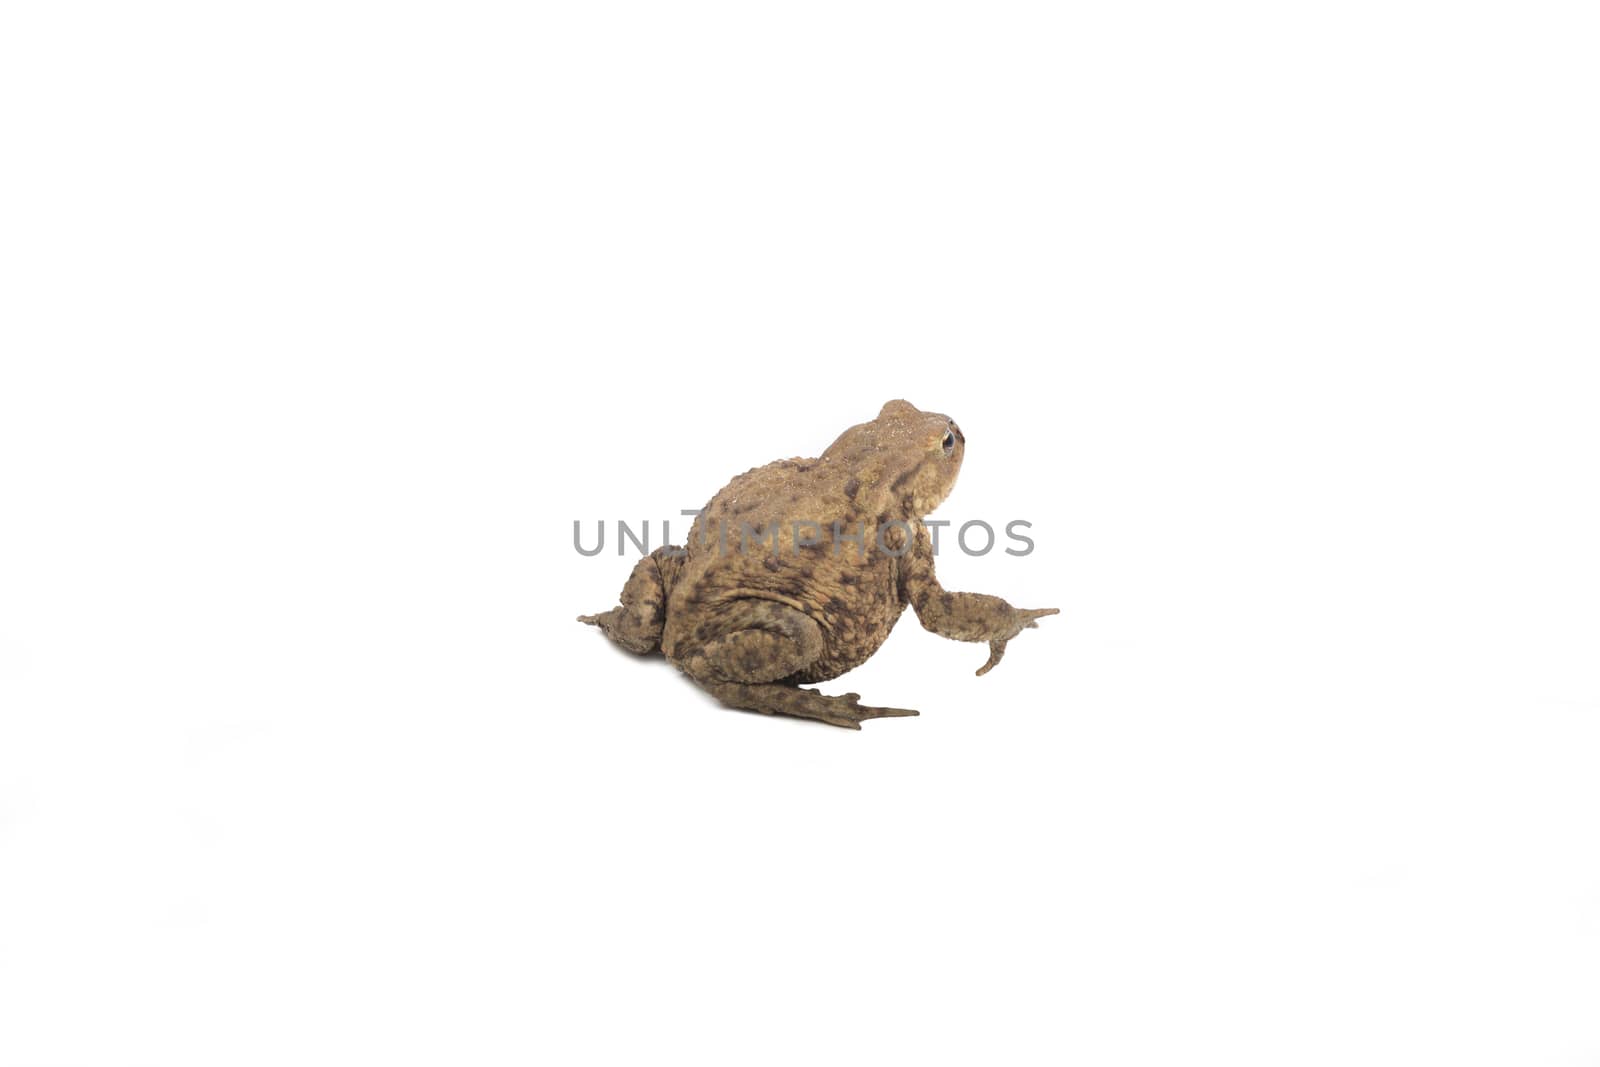 Hoptoad isolated on white background by avanheertum